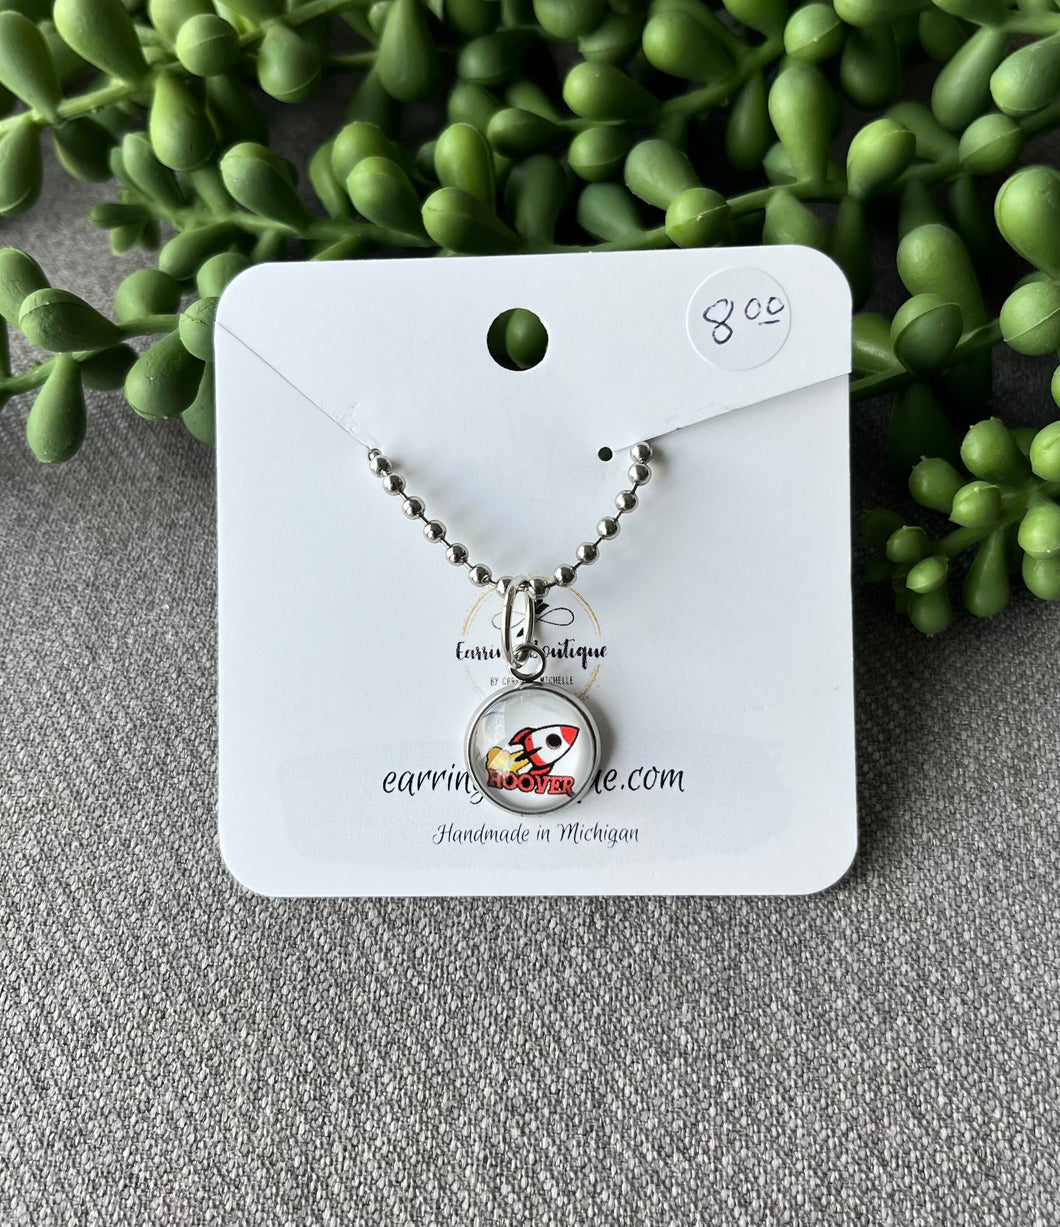 Livonia Hoover Elementary Necklace